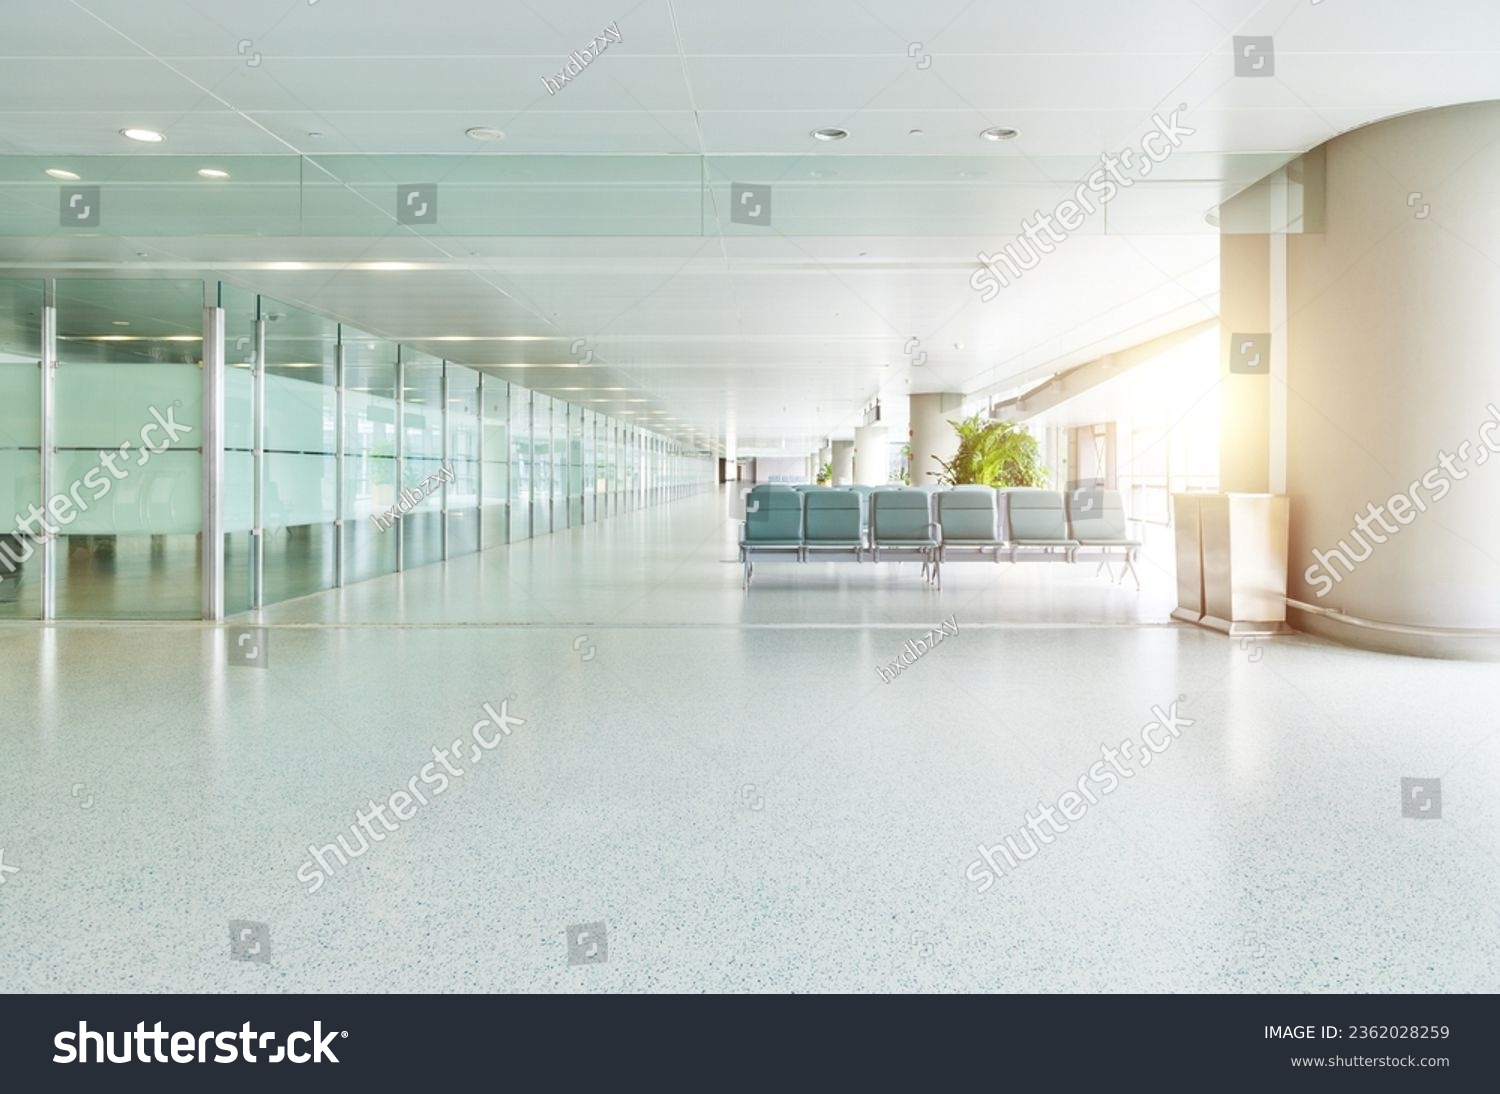 Empty departure lounge in airport. #2362028259